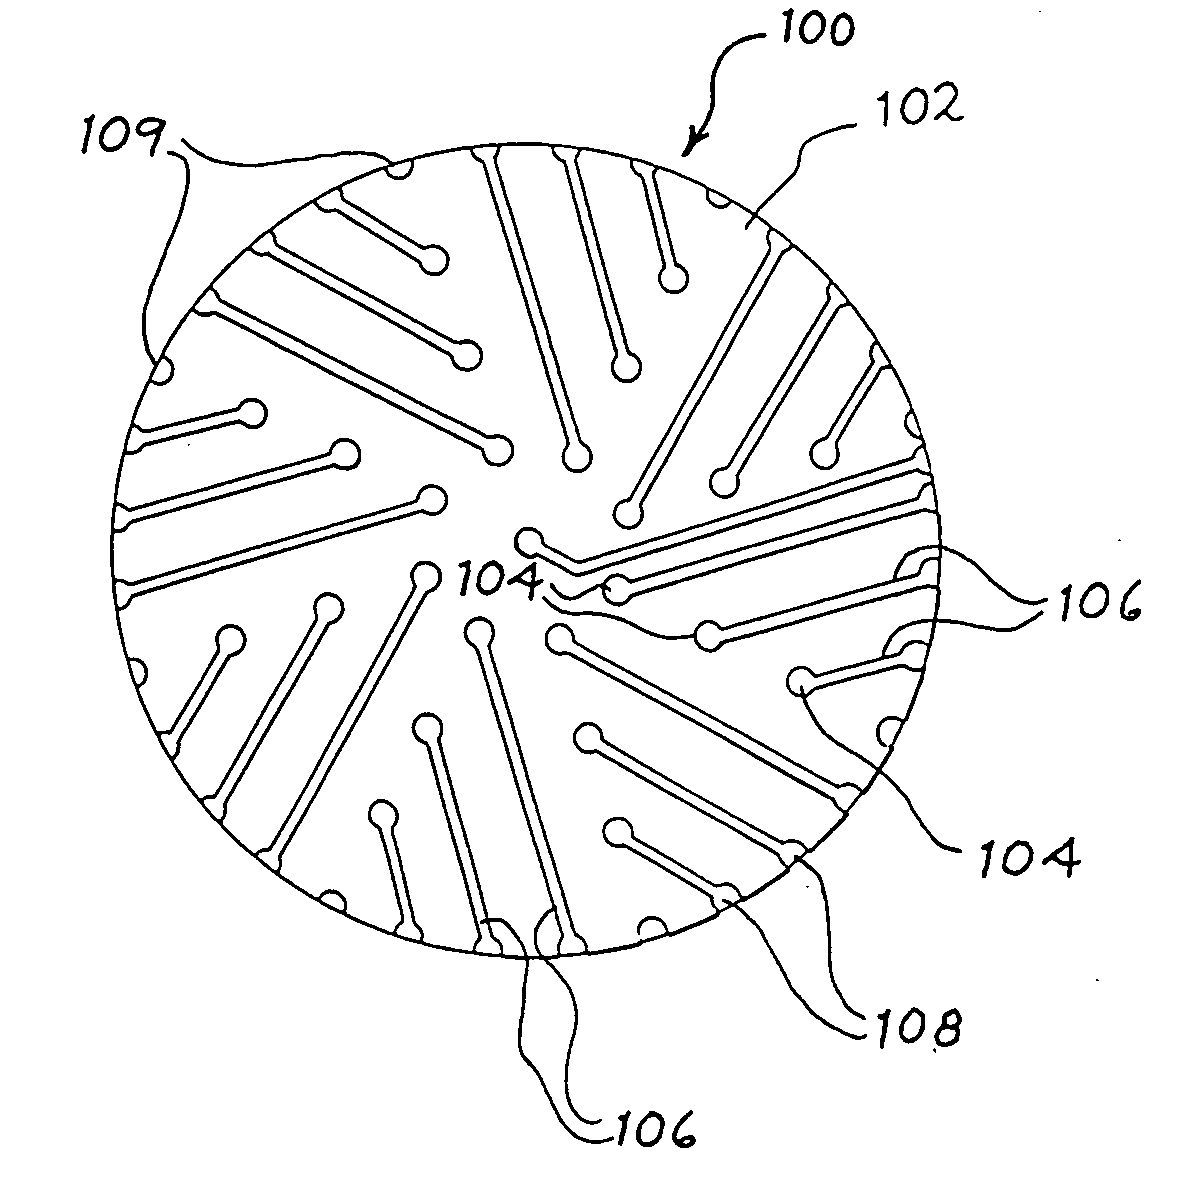 Apparatus and methods for mapping retinal function